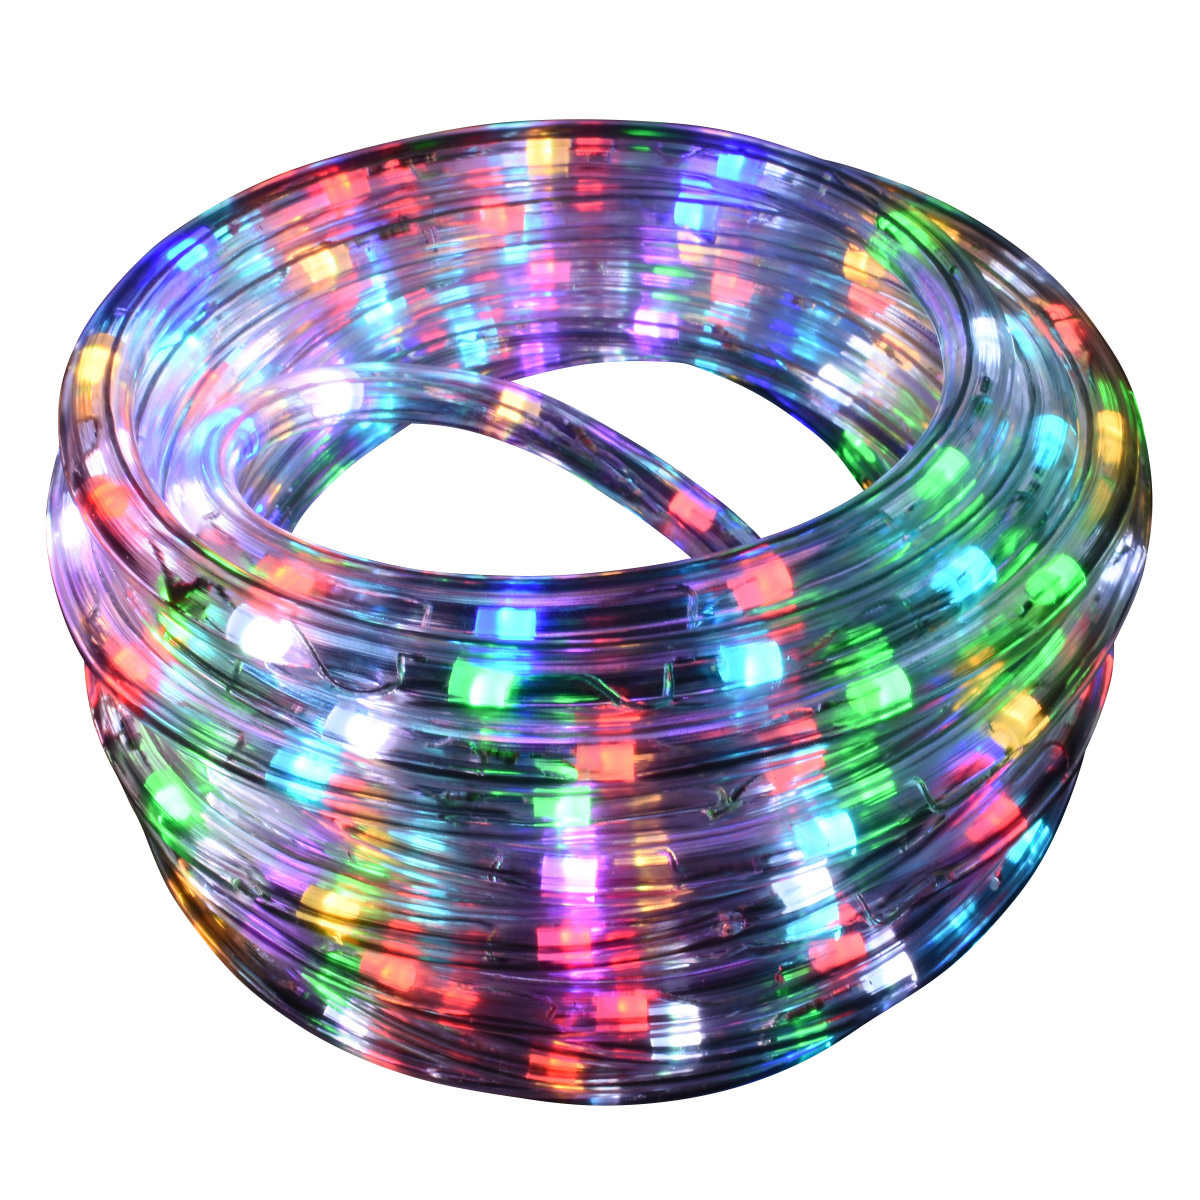 LED Rope Lights 4-Lighting Mode Strip Lights Flexible With Remote Outdoor/Indoor 